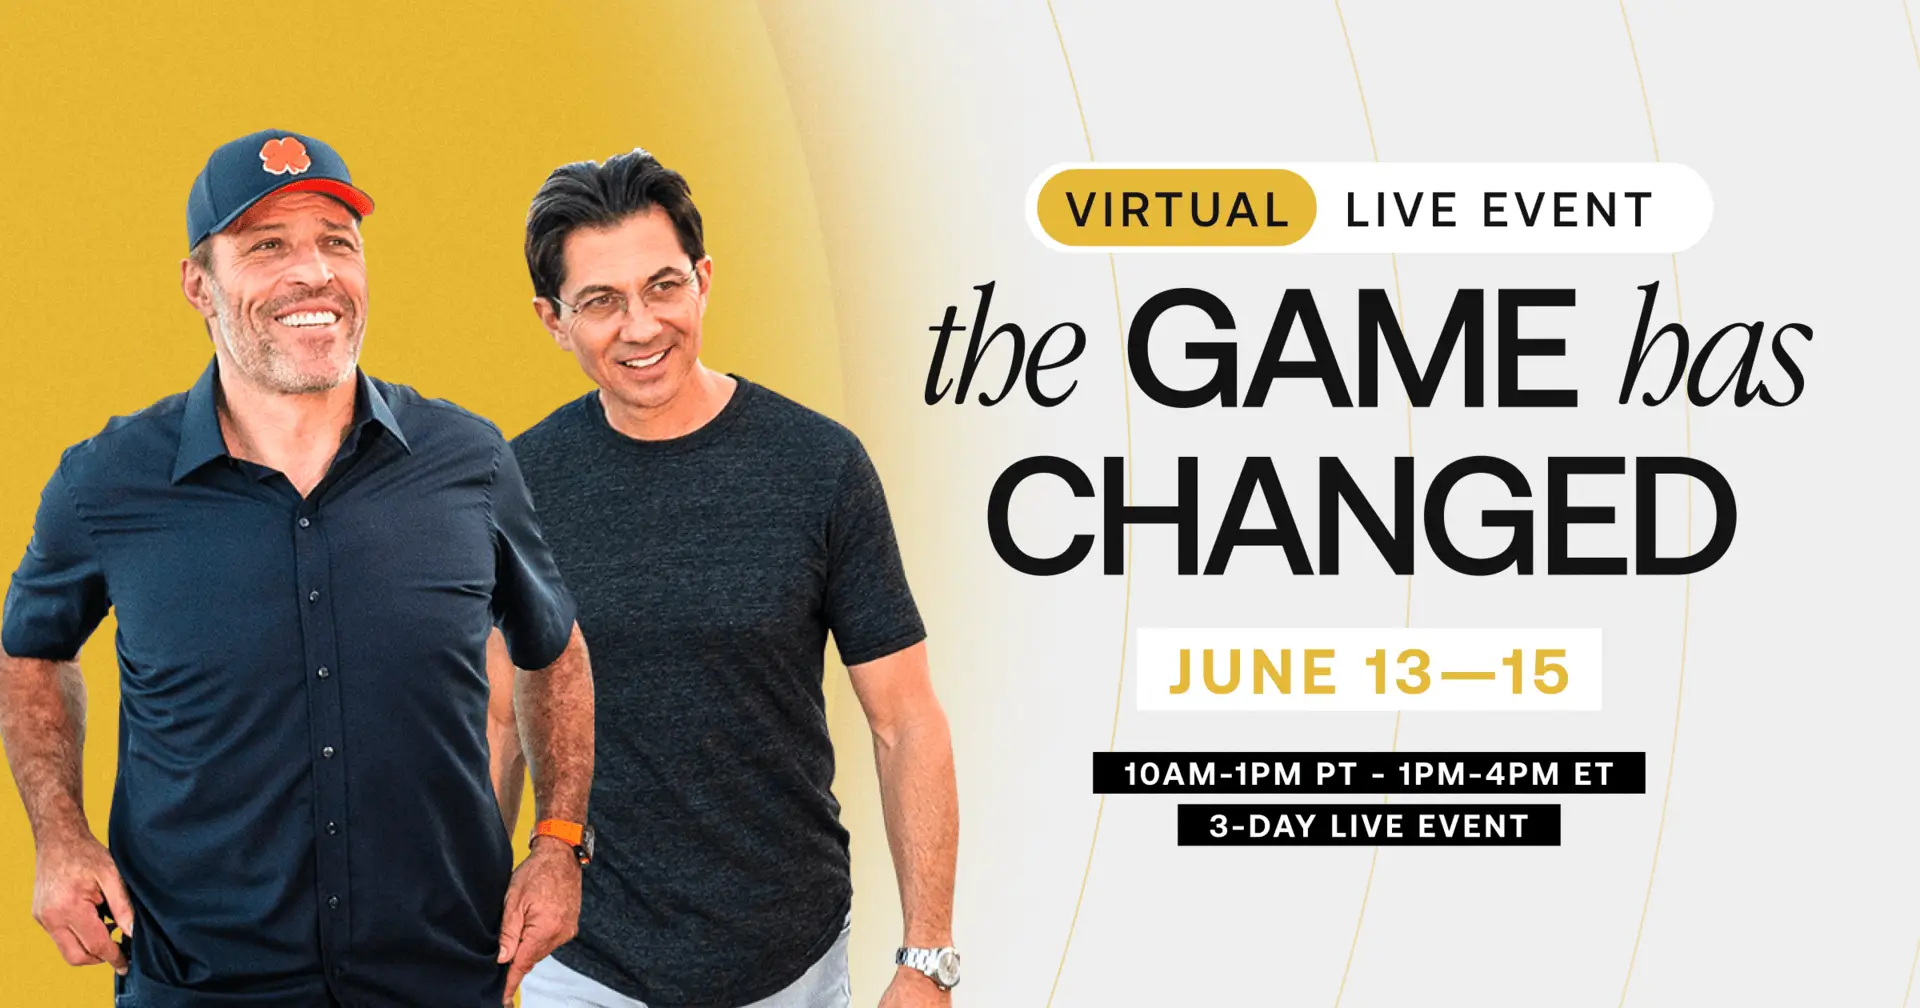 Join Now To The Game Has Changed – Virtual Live Event